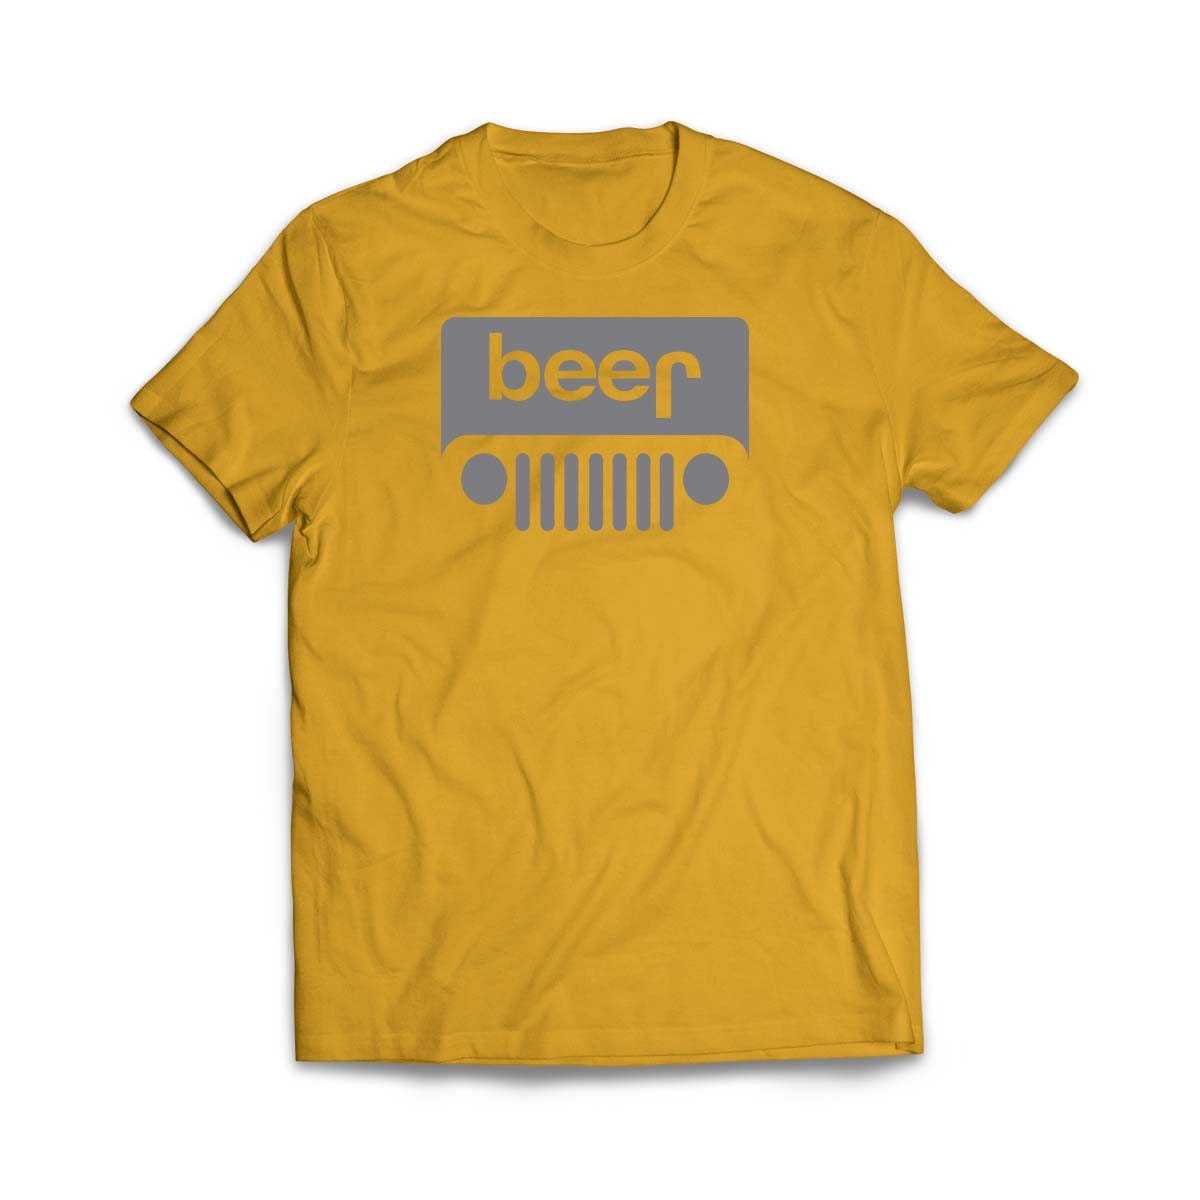 Beer/Jeep T-Shirt